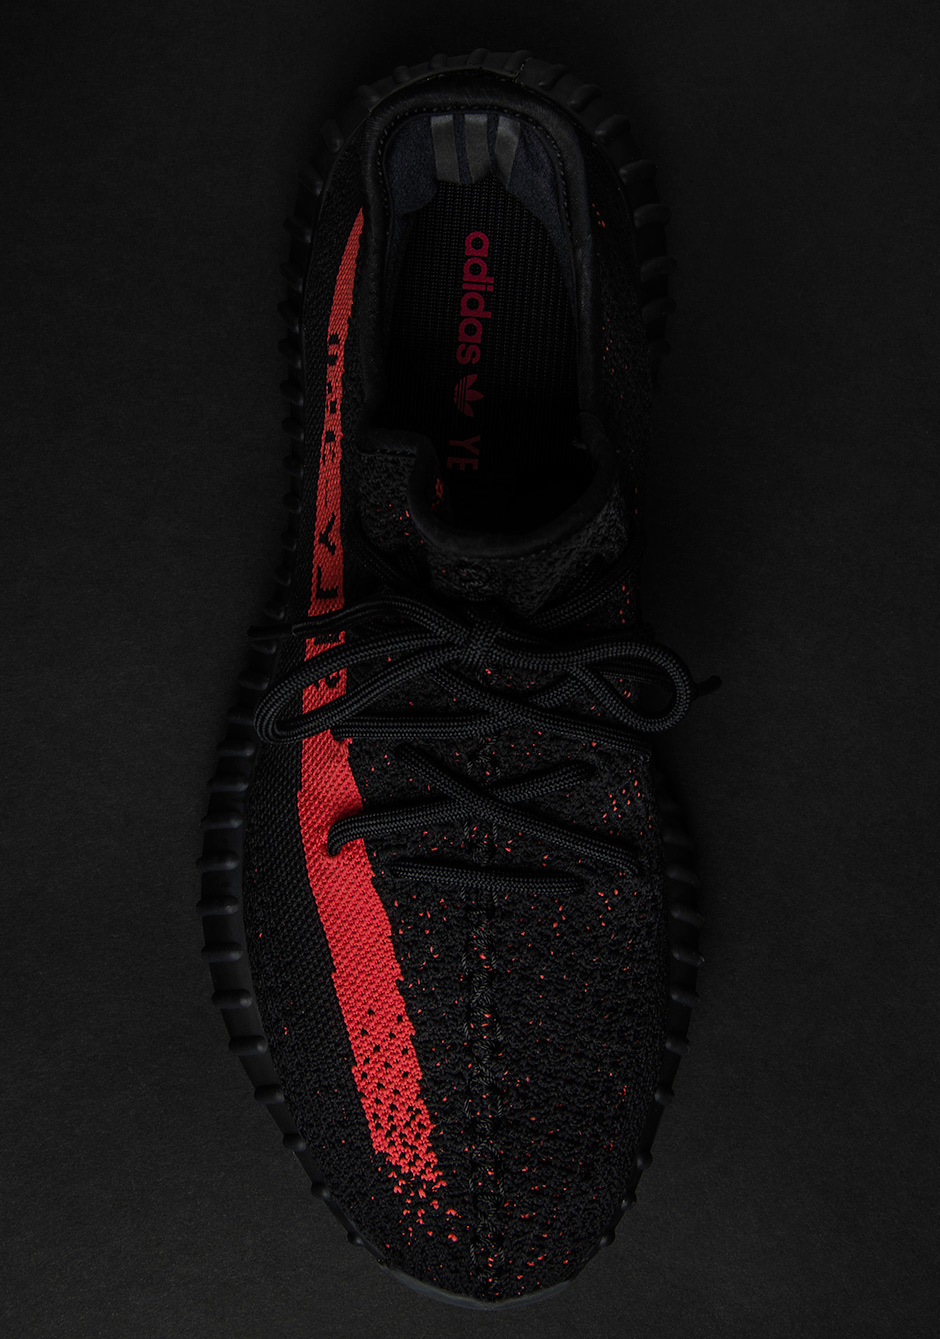 Adidas Yeezy Boost 350 v2 Red Core Black kanye west BY 9612 Size 5